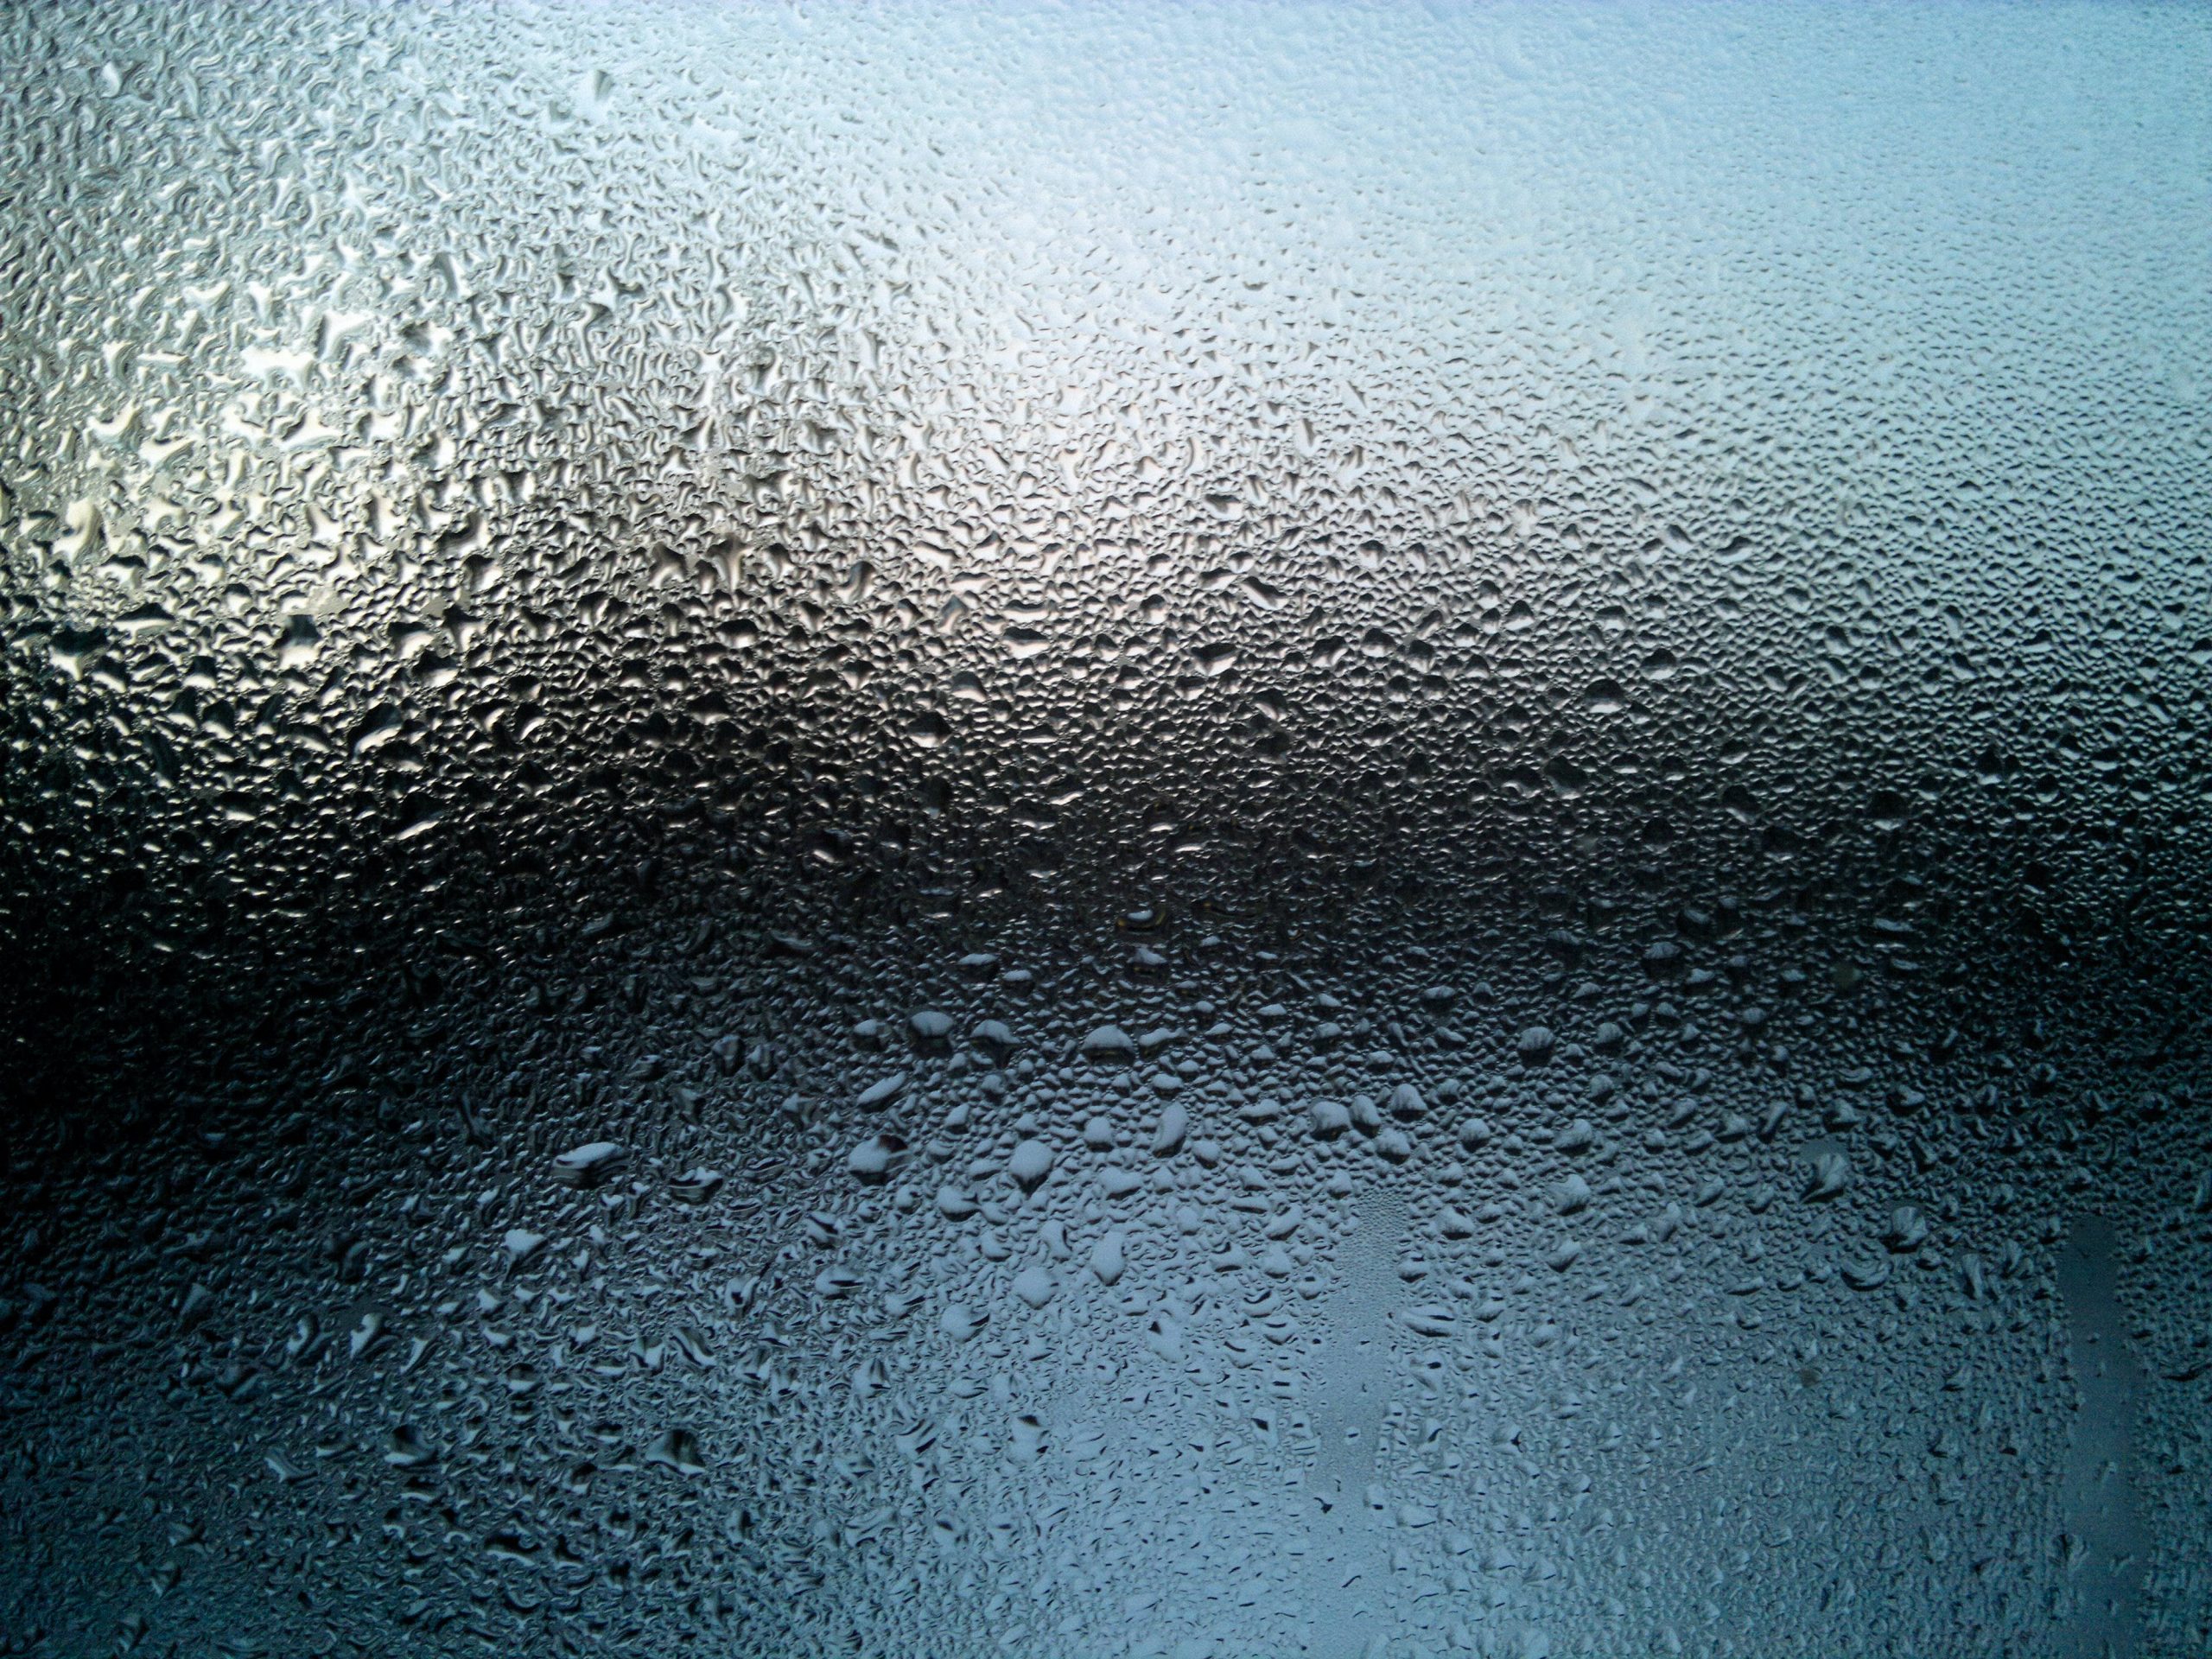 How to Stop Condensation Guide